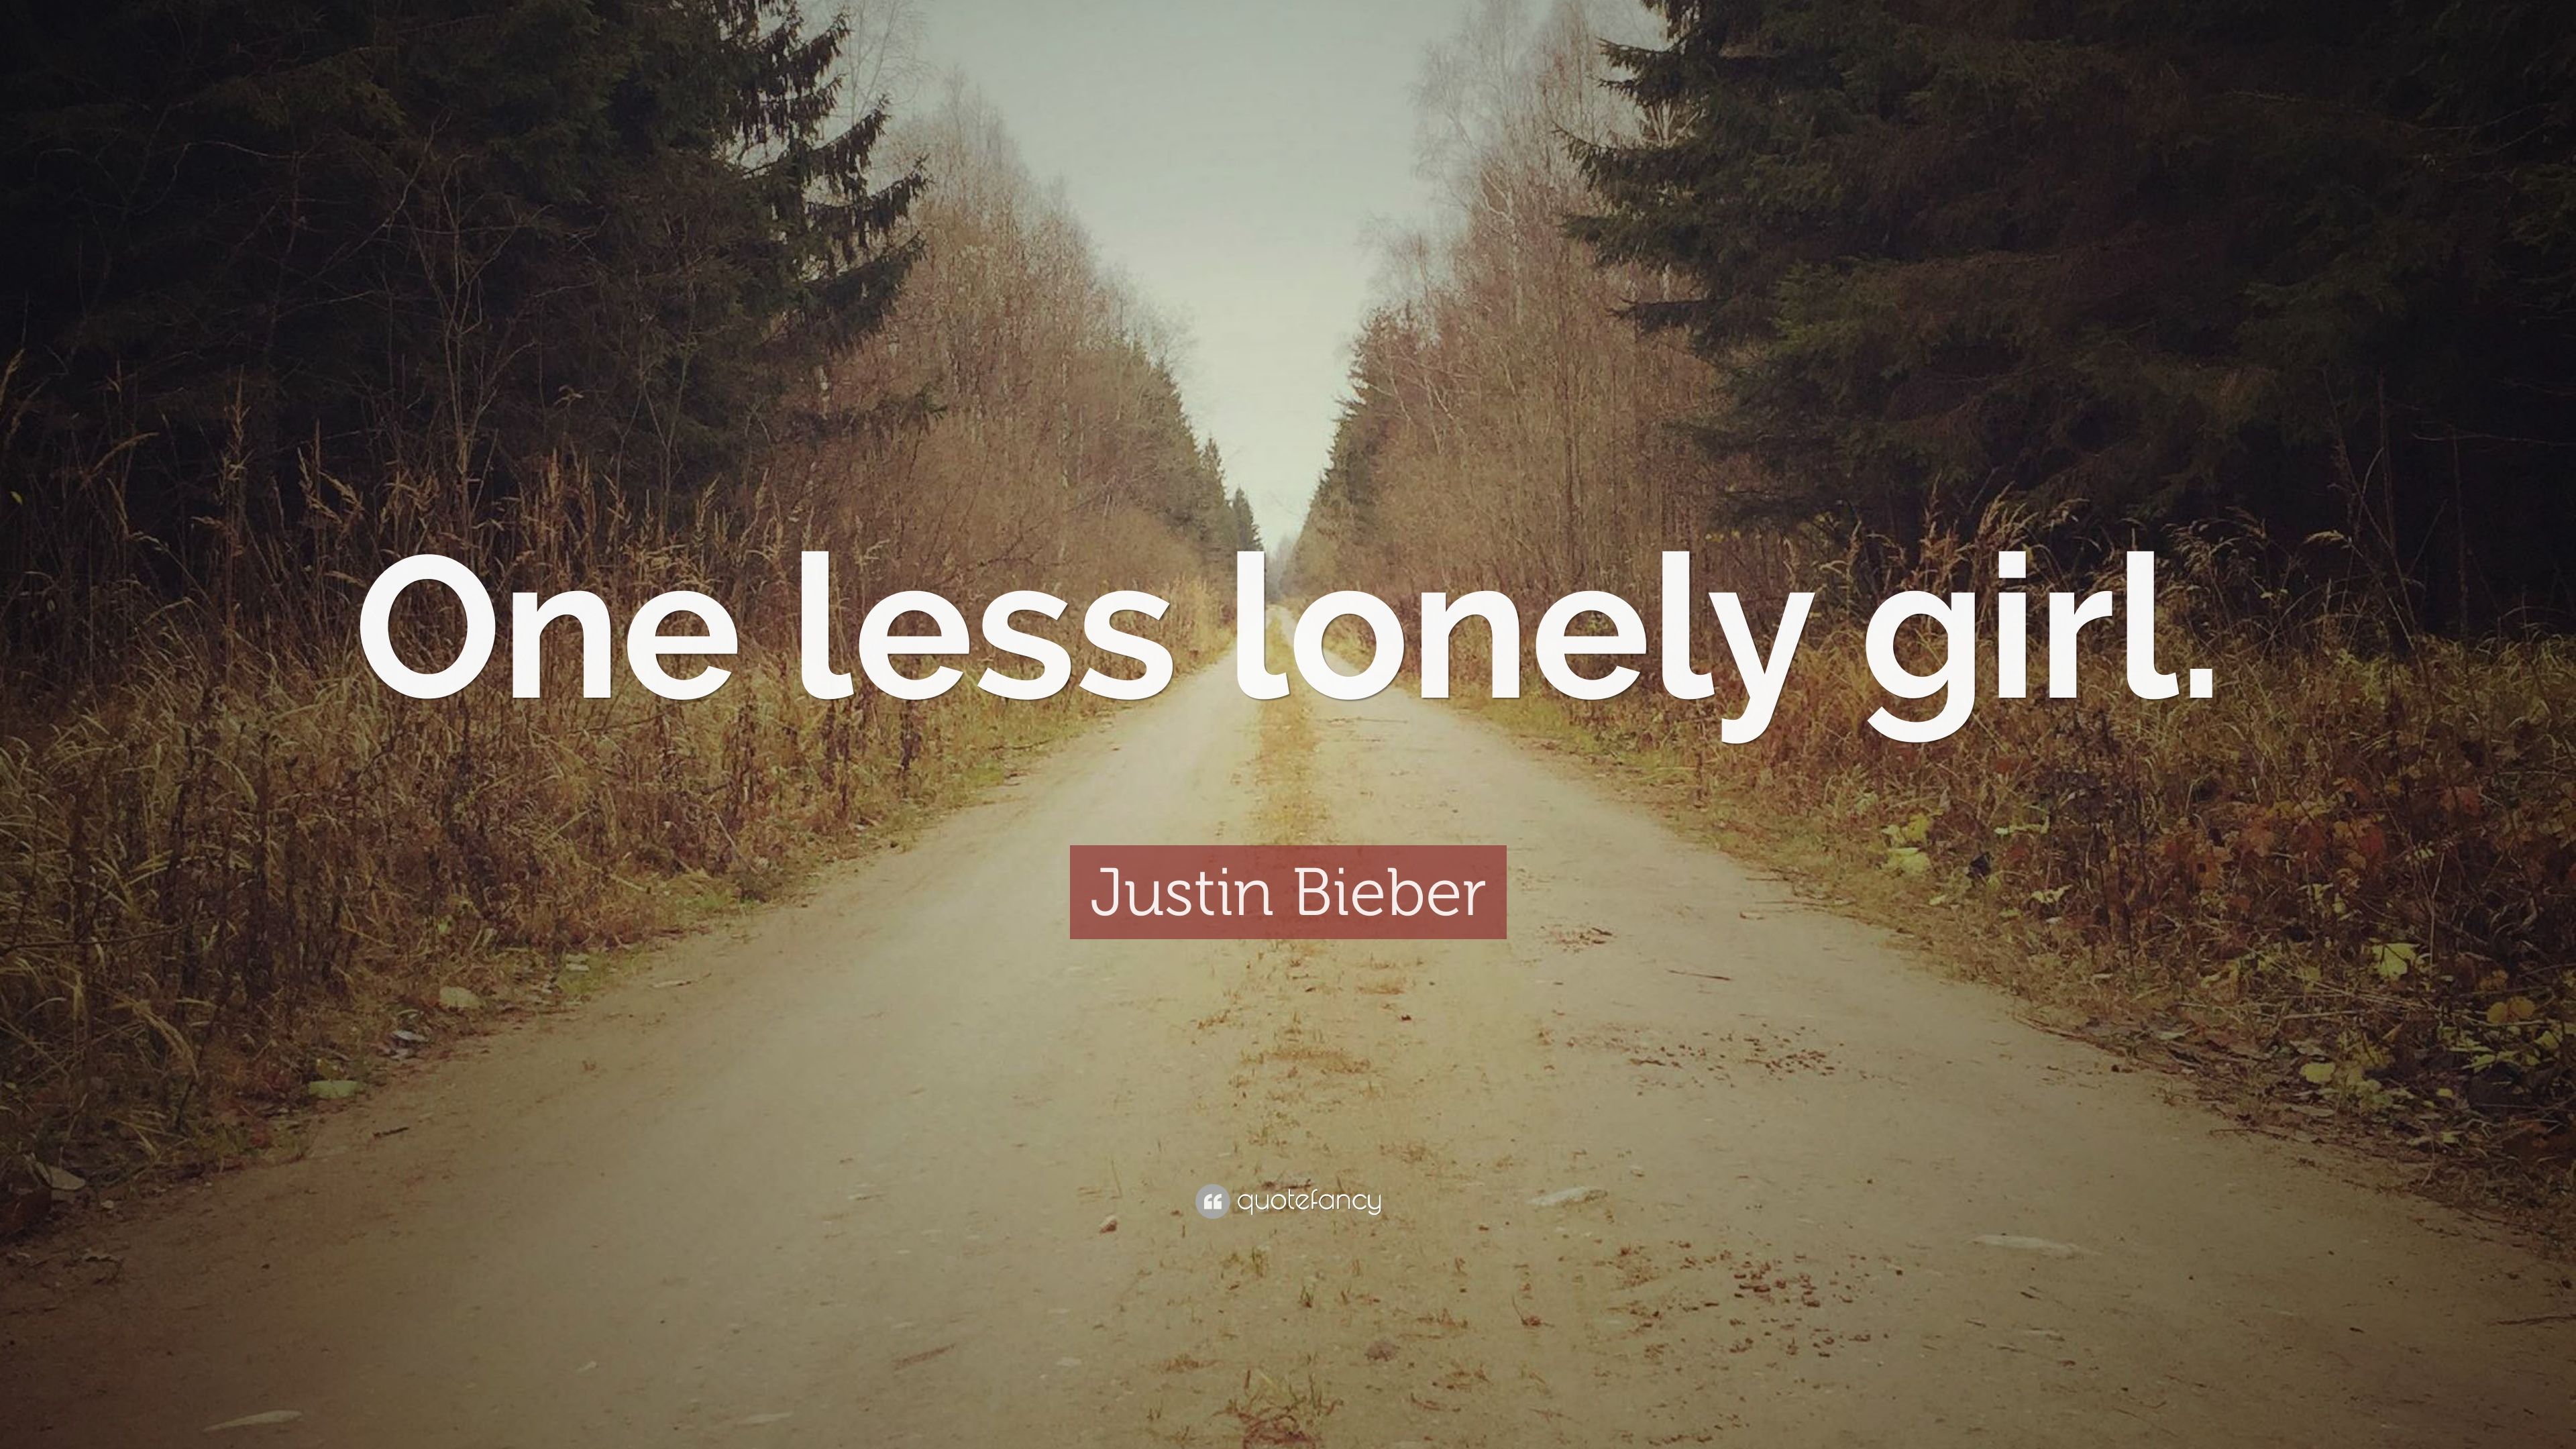 Justin Bieber Quote: “One less lonely girl.” 10 wallpaper